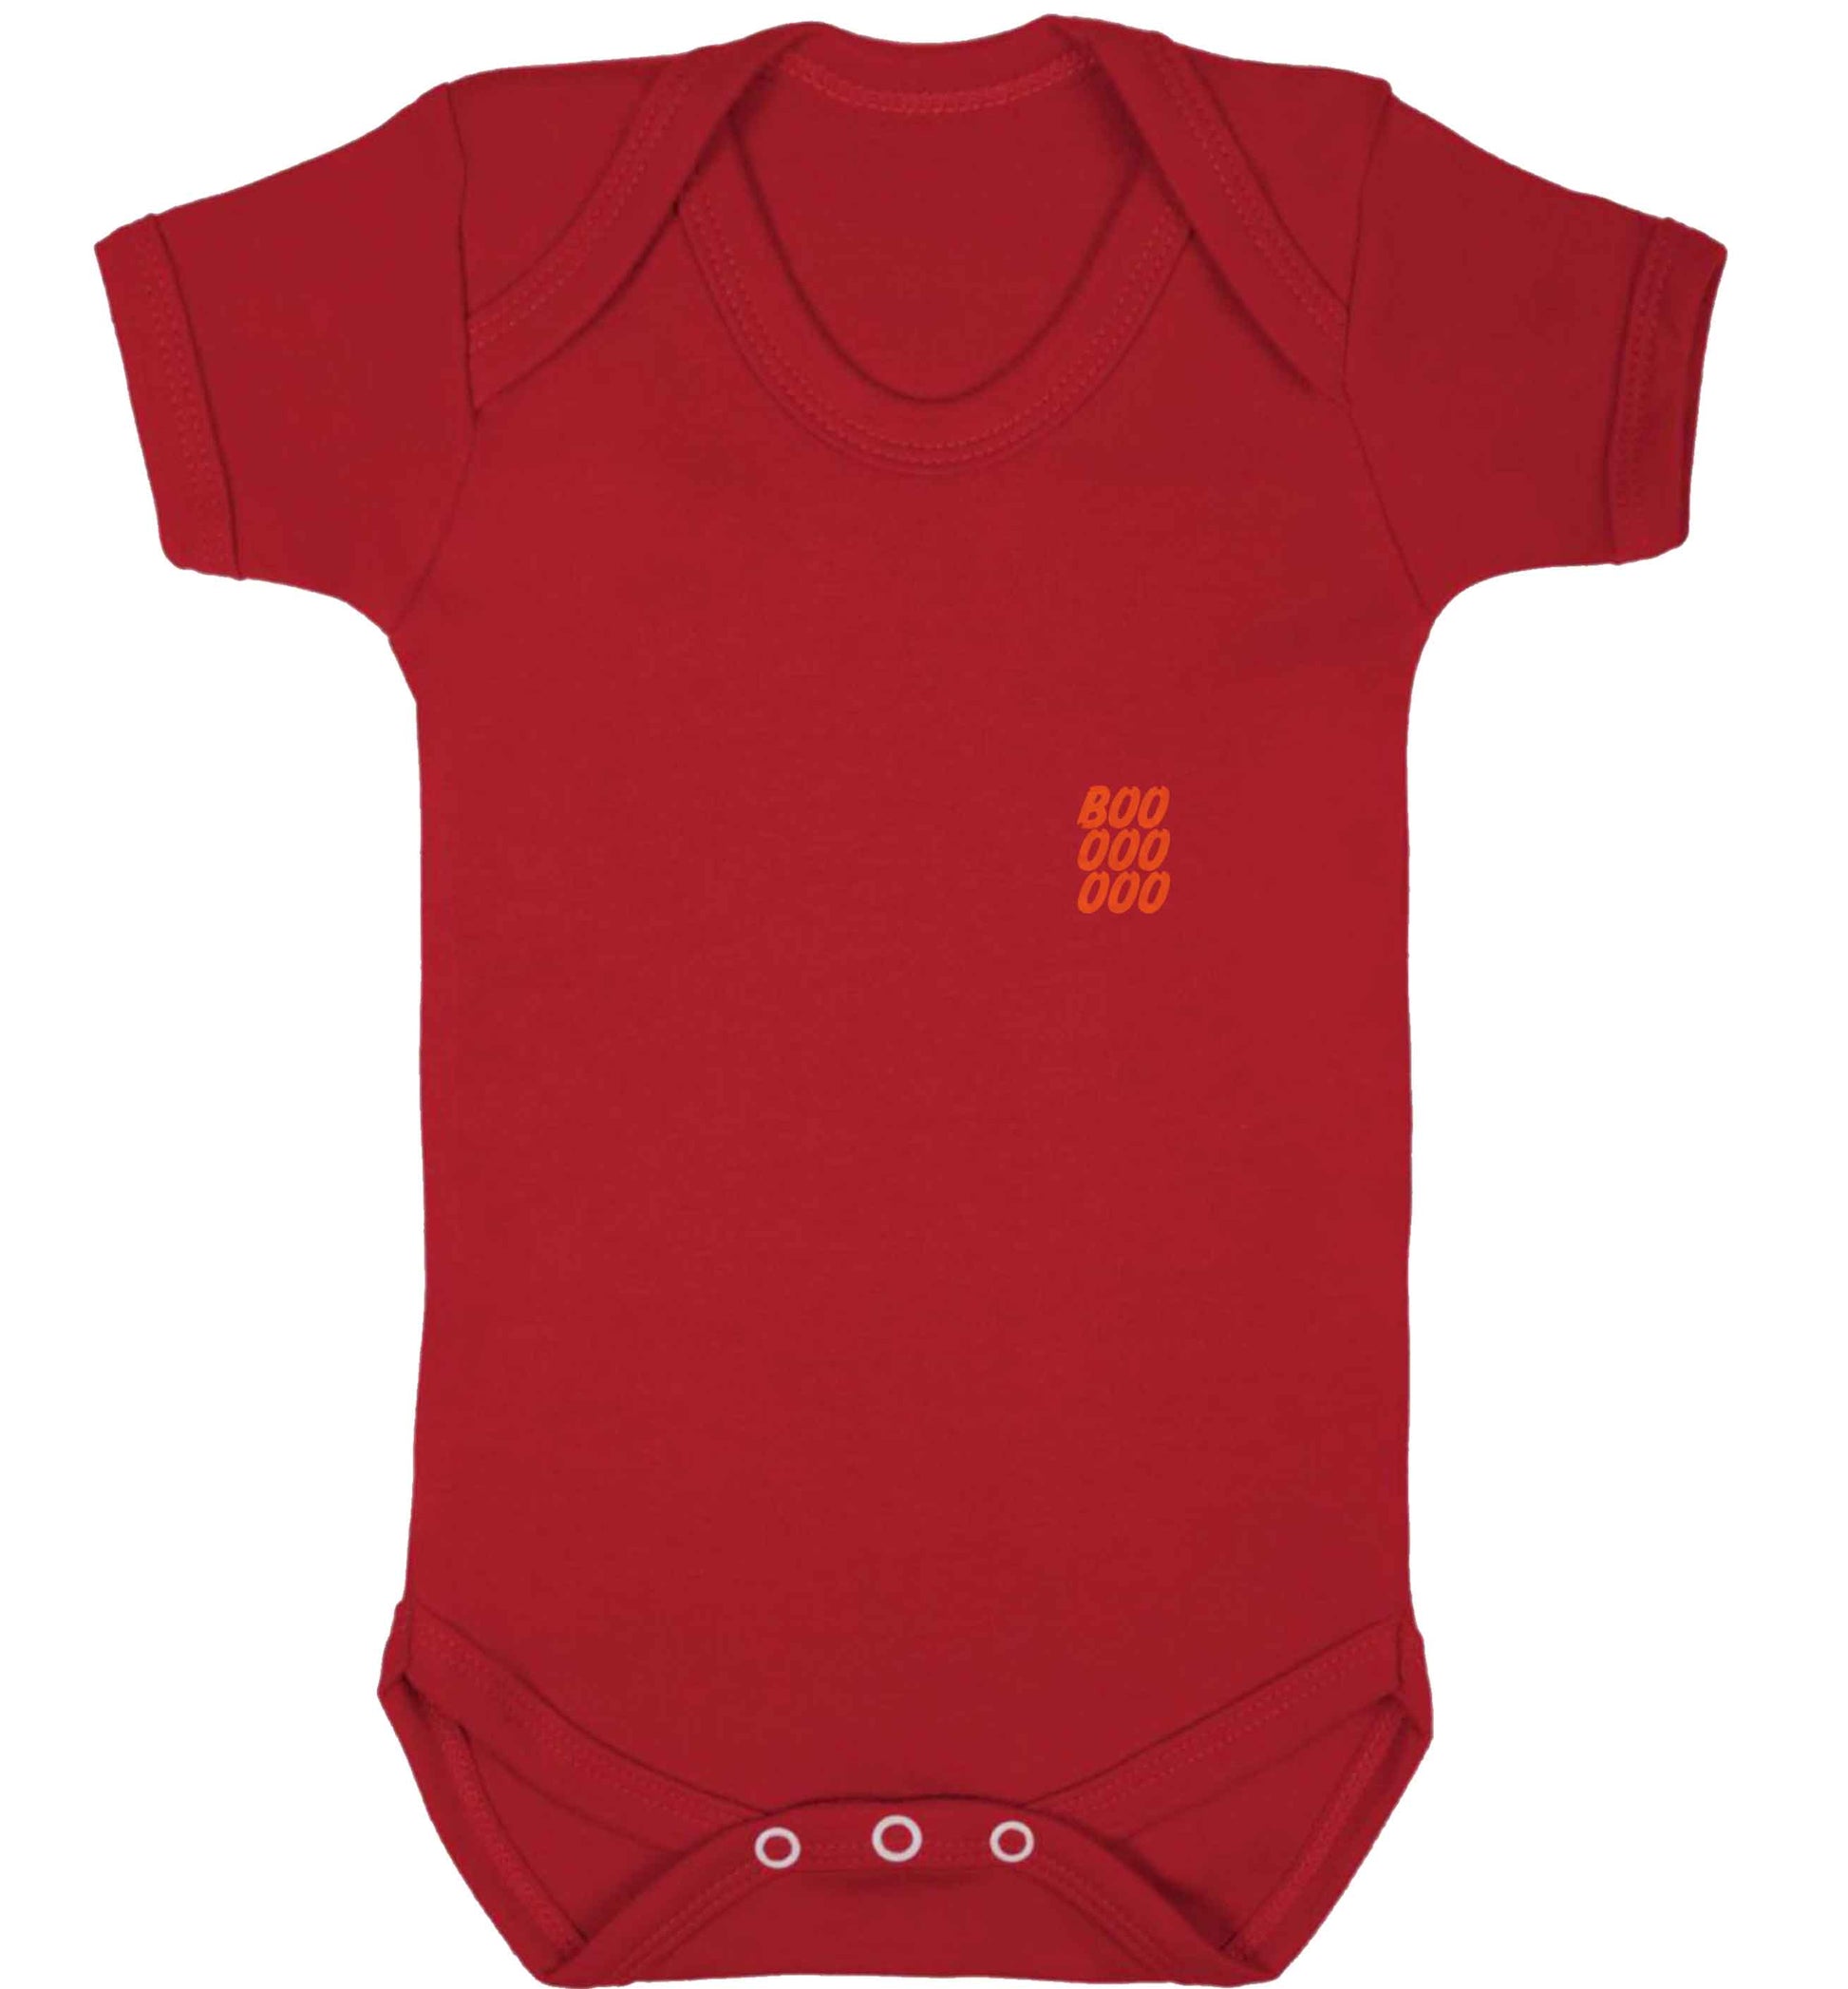 Boo pocket baby vest red 18-24 months